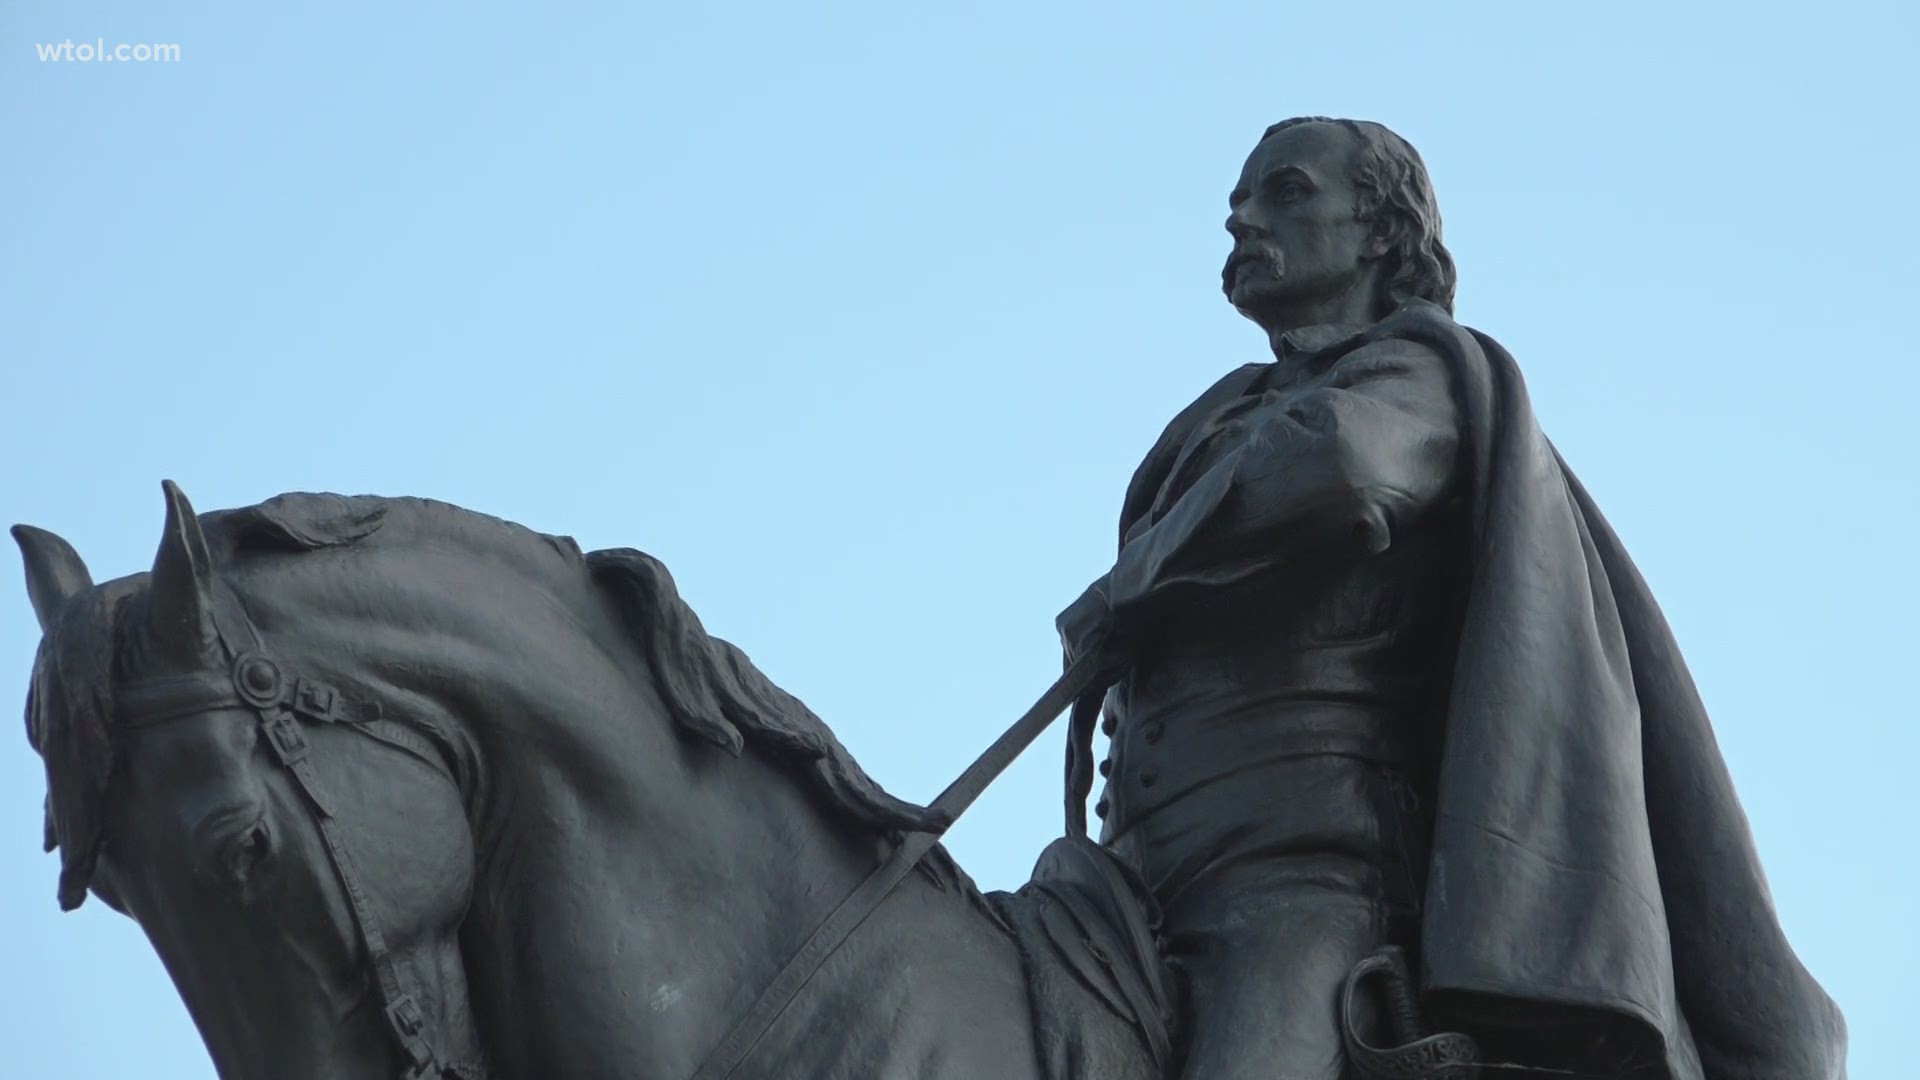 The downtown statue will not be removed or relocated but updated with help from several community partners to better reflect Custer's controversial life.